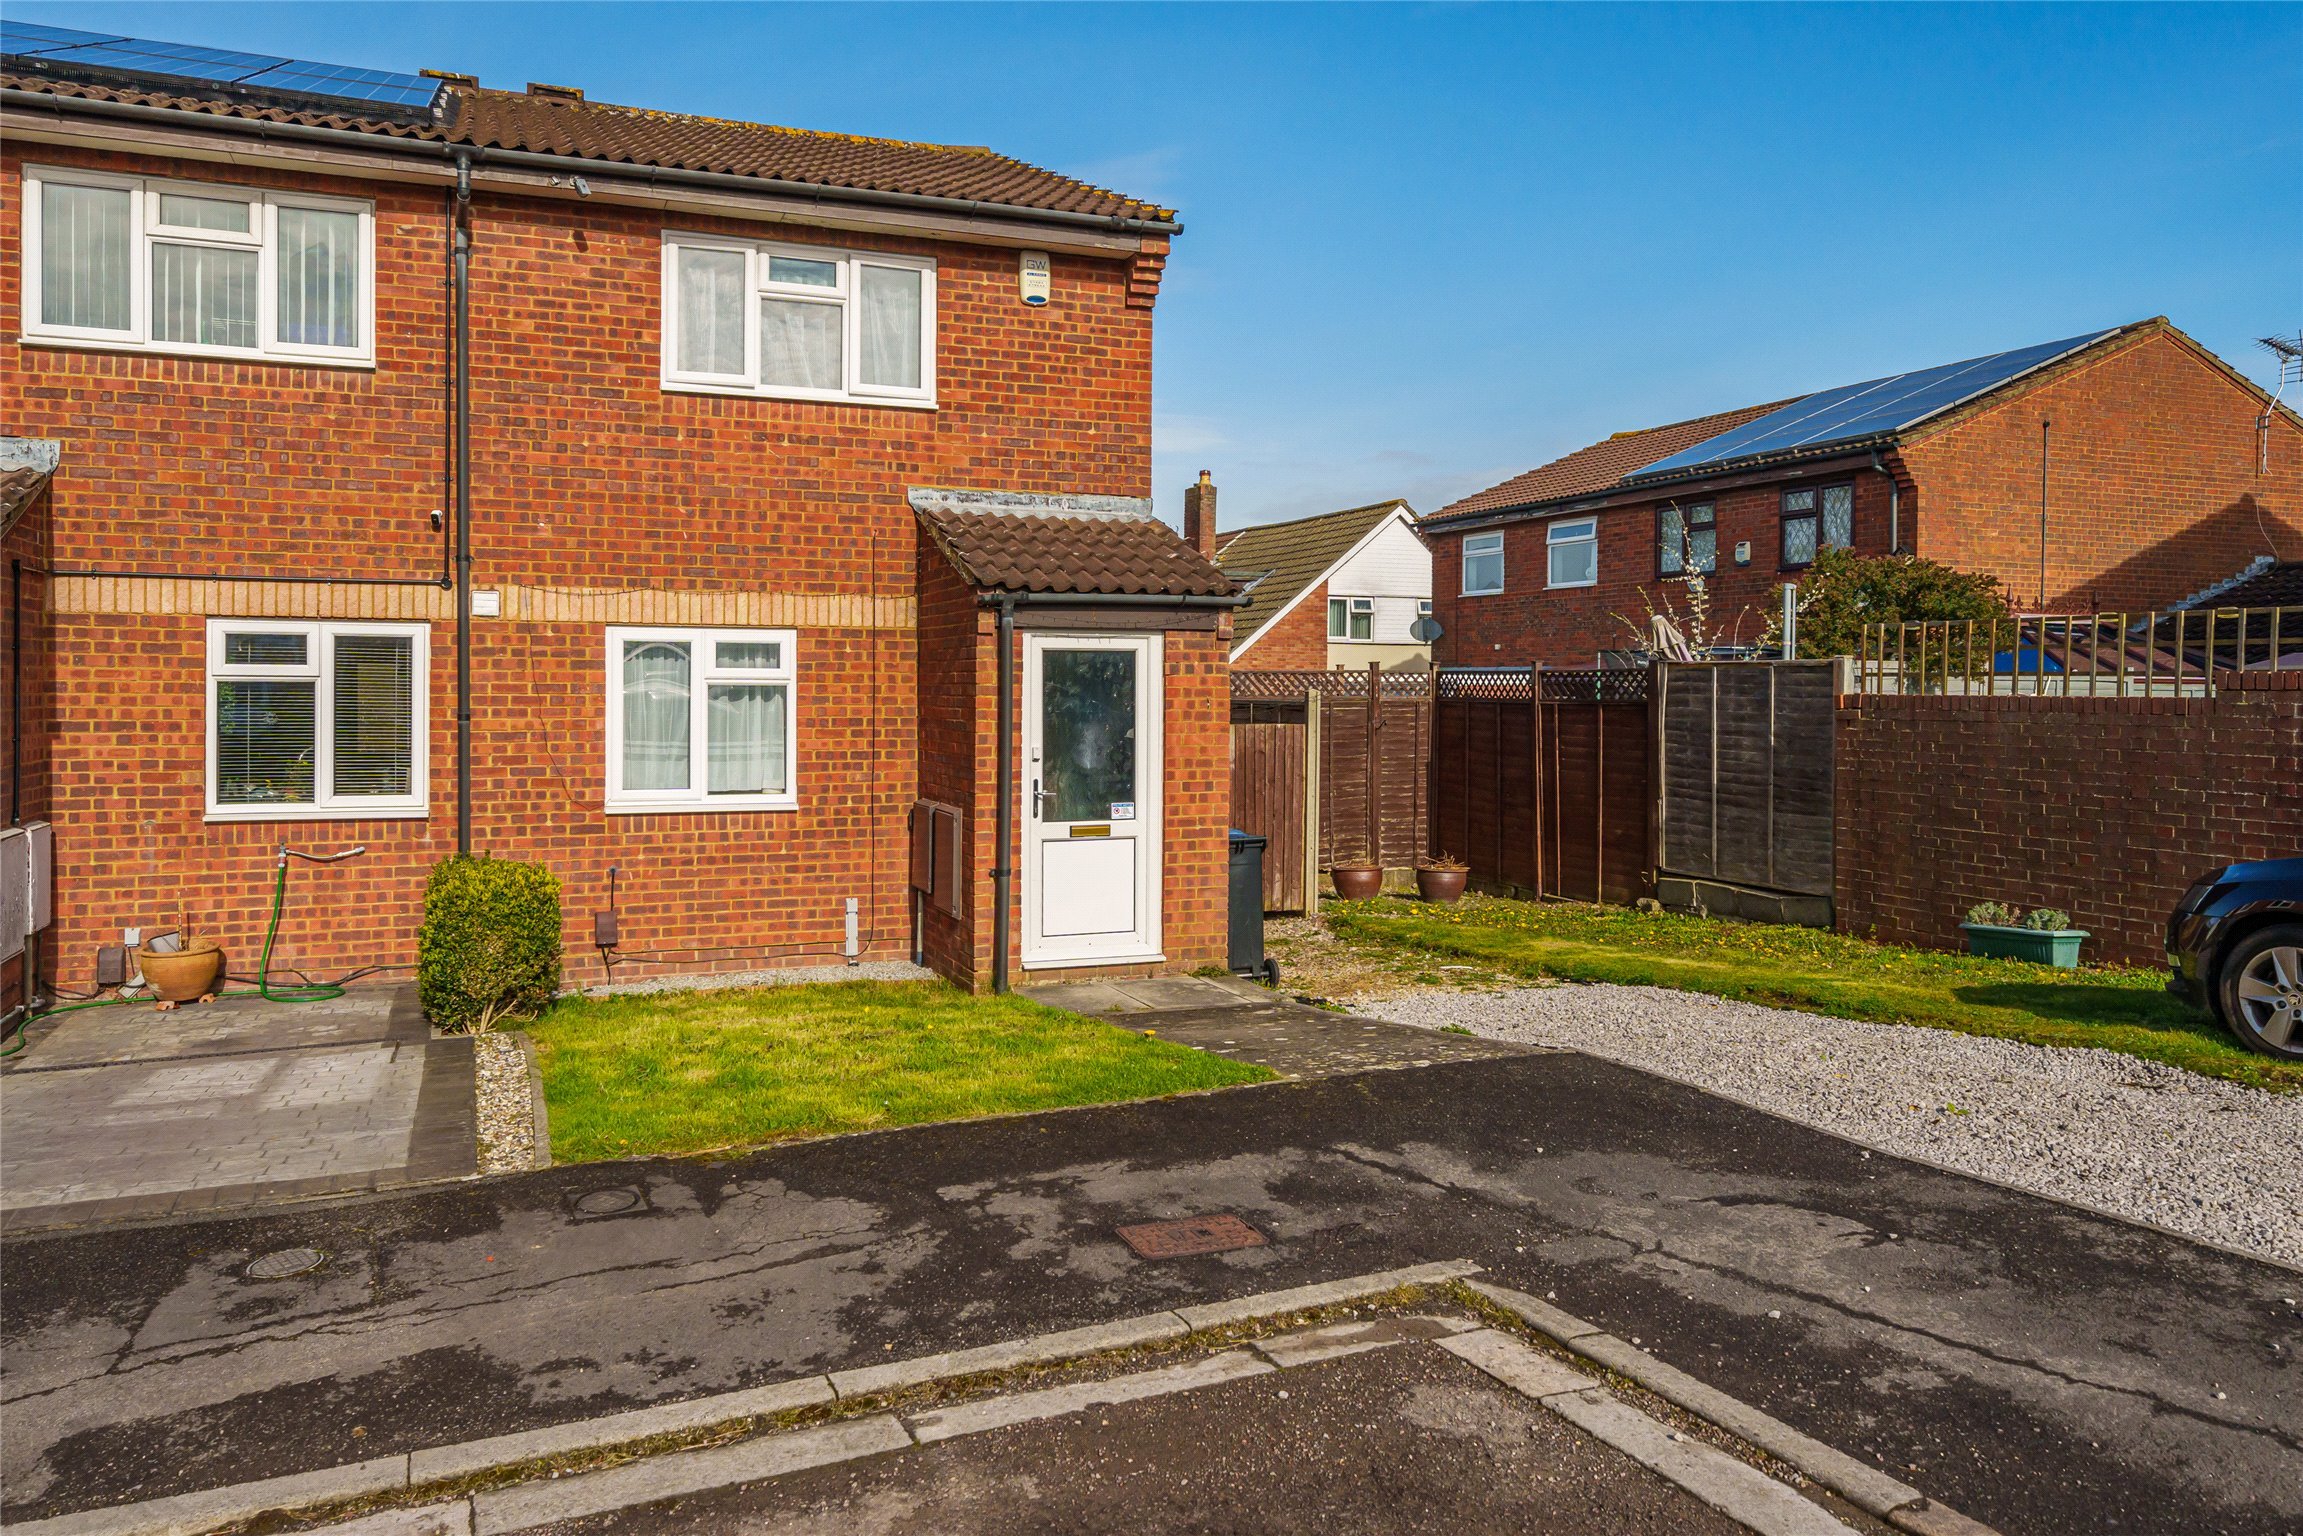 Amberley Road, Patchway, Bristol, Gloucestershire, BS34